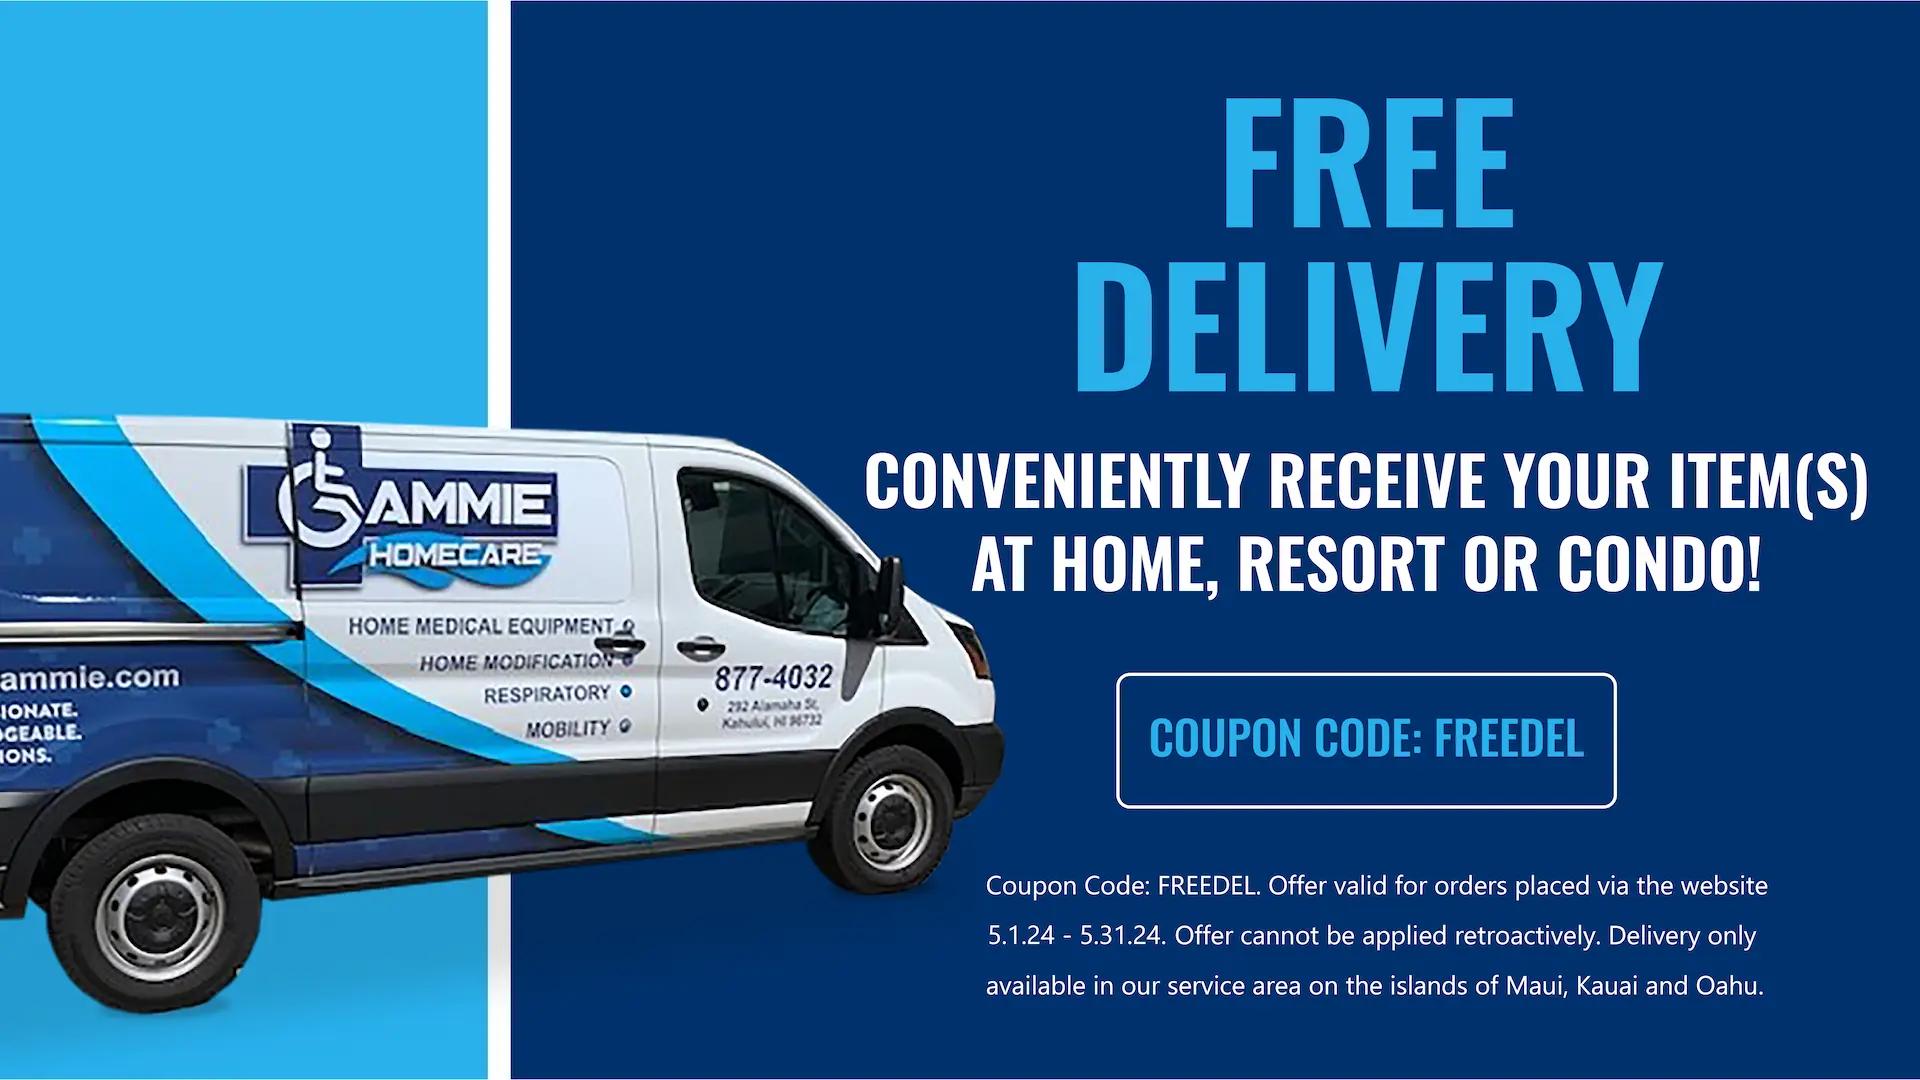 Get free delivery through the month of May by using the code FREEDEL. Delivery only available in our service area on the islands of Maui, Kauai and Oahu.